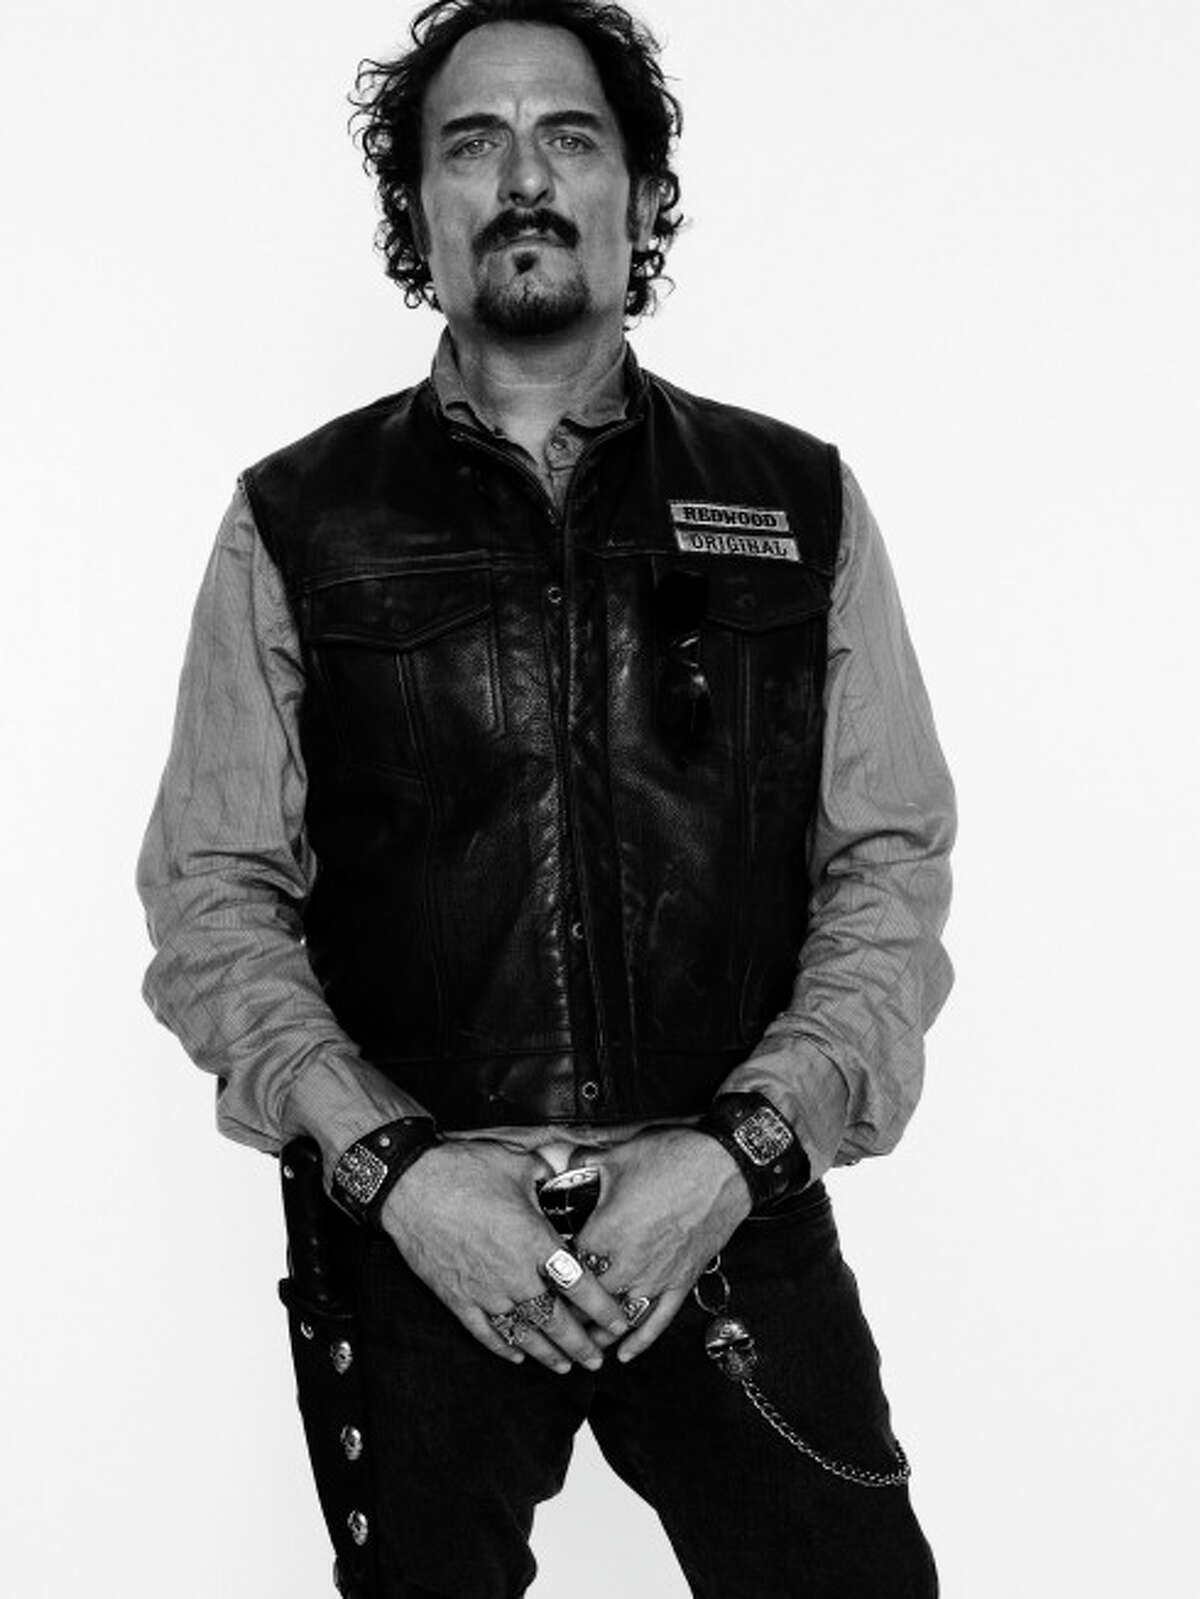 Kim Coates, who plays Tig, will be there too.